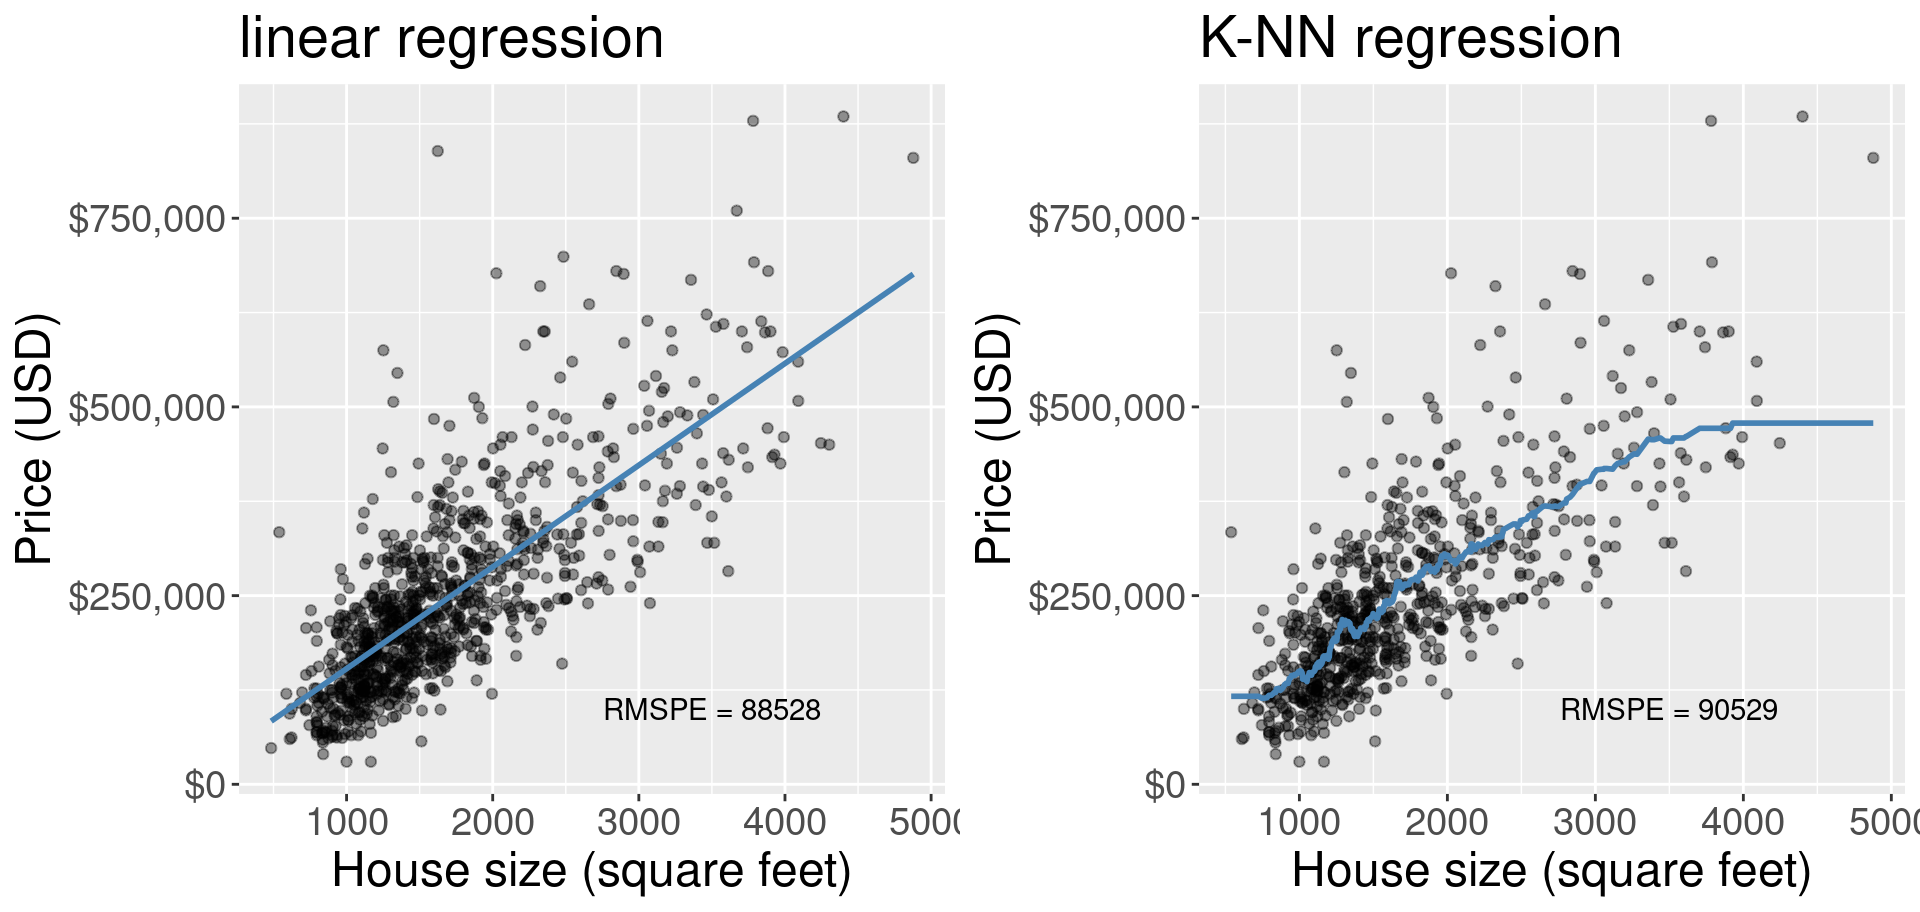 Comparison of simple linear regression and K-NN regression.